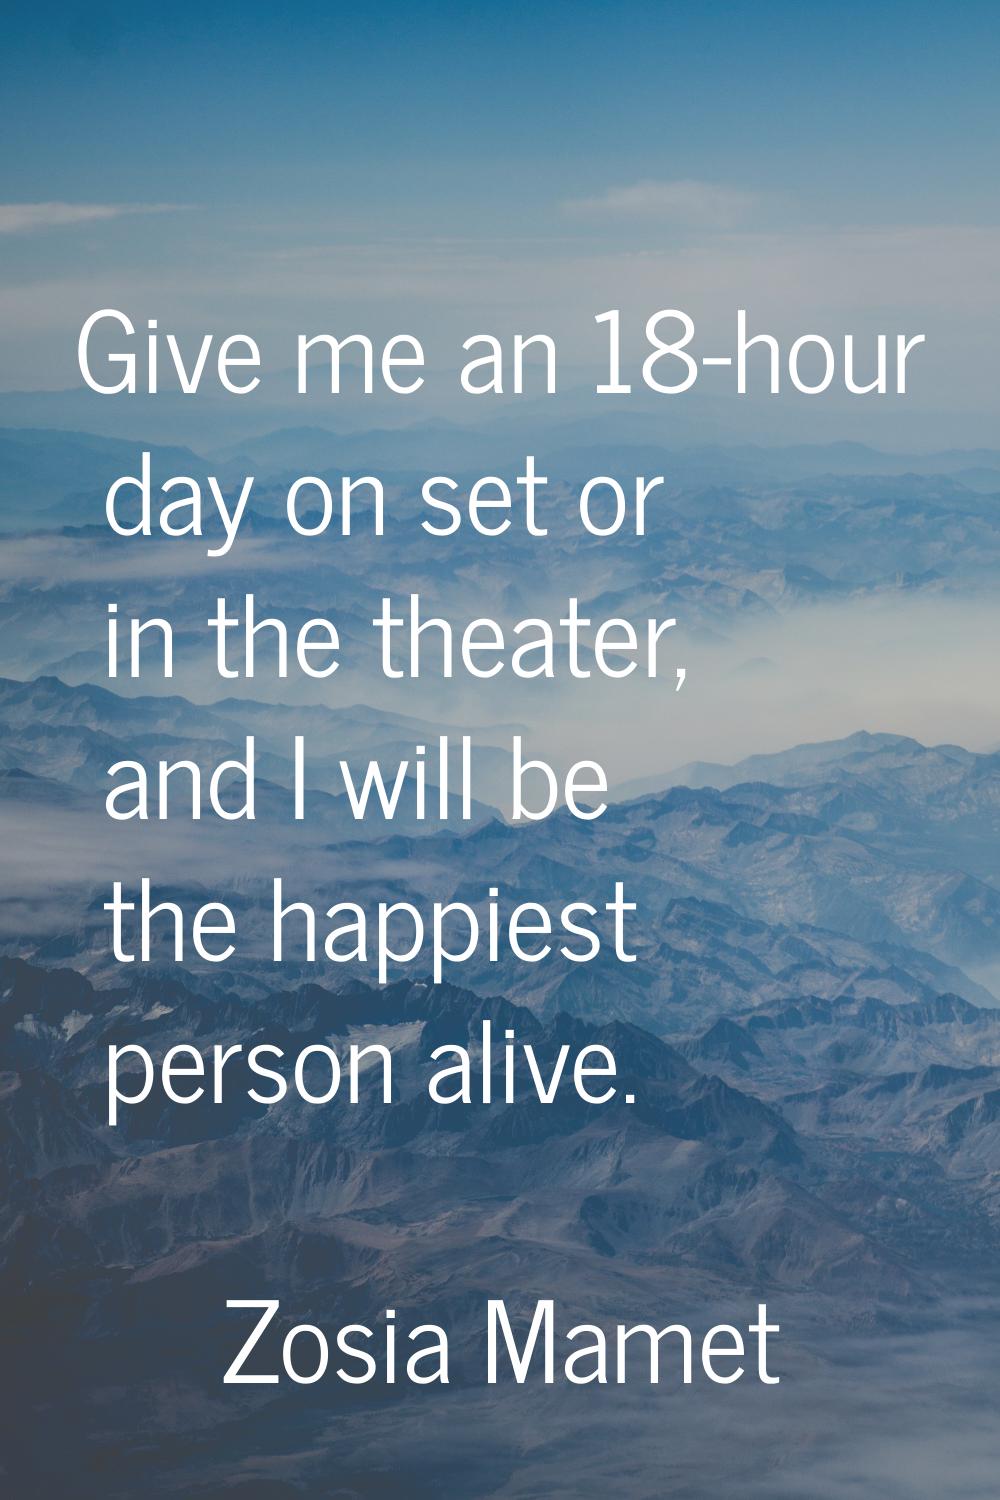 Give me an 18-hour day on set or in the theater, and I will be the happiest person alive.